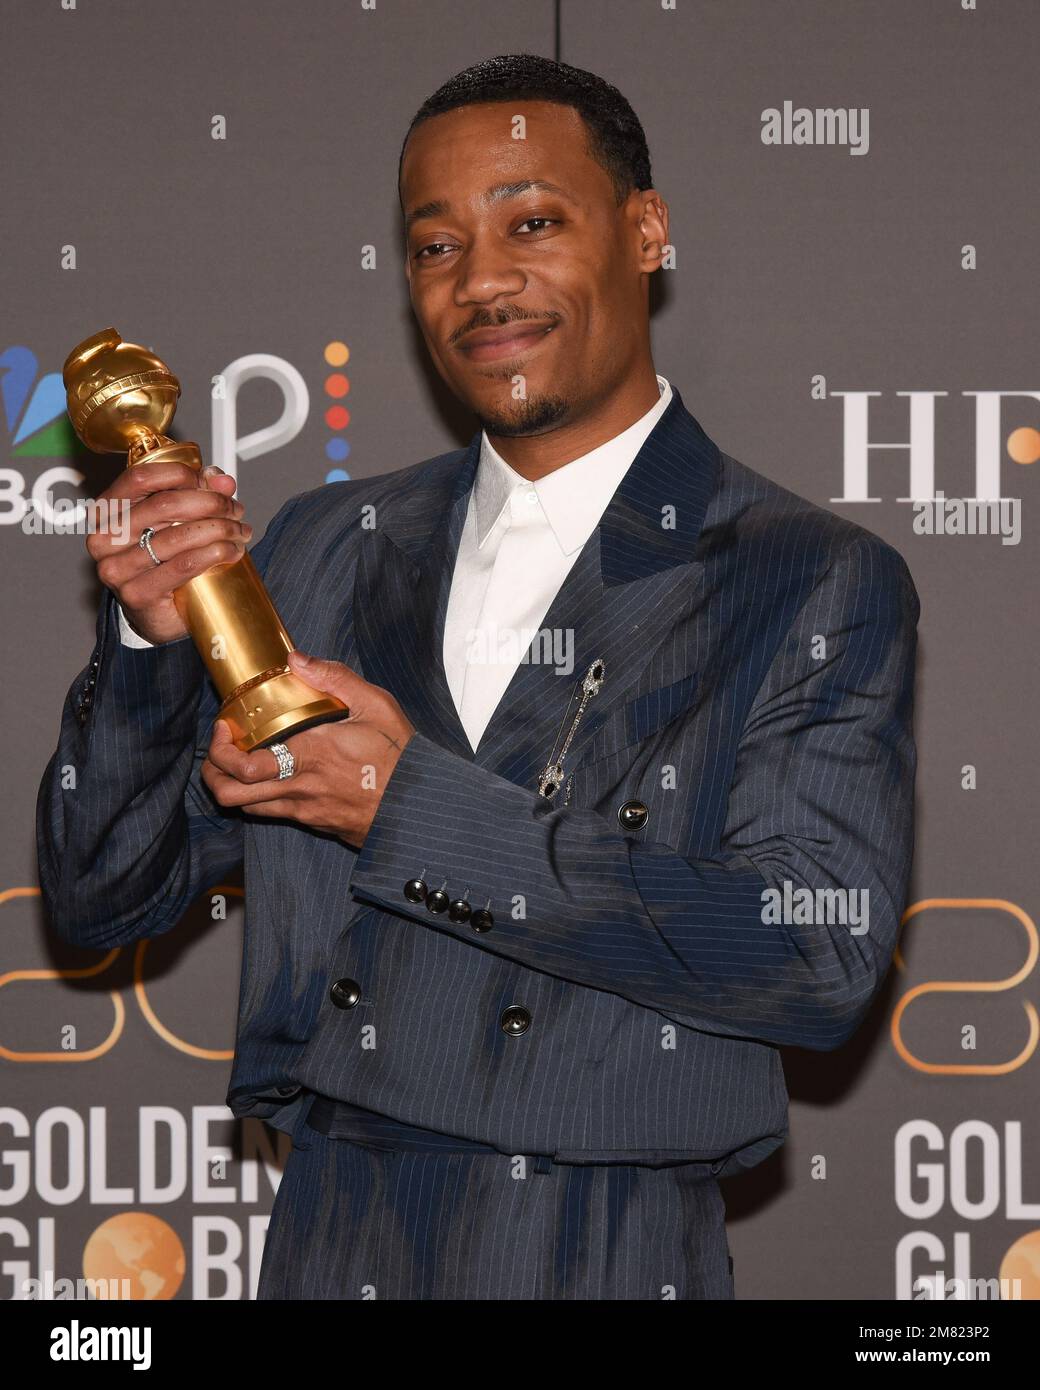 January 10, 2023, Beverly Hills, California, USA: TYLER JAMES WILLIAMS with  his Golden Globe award for best supporting actor in a musical, comedy or  drama for his role in Abbott Elementary. (Credit